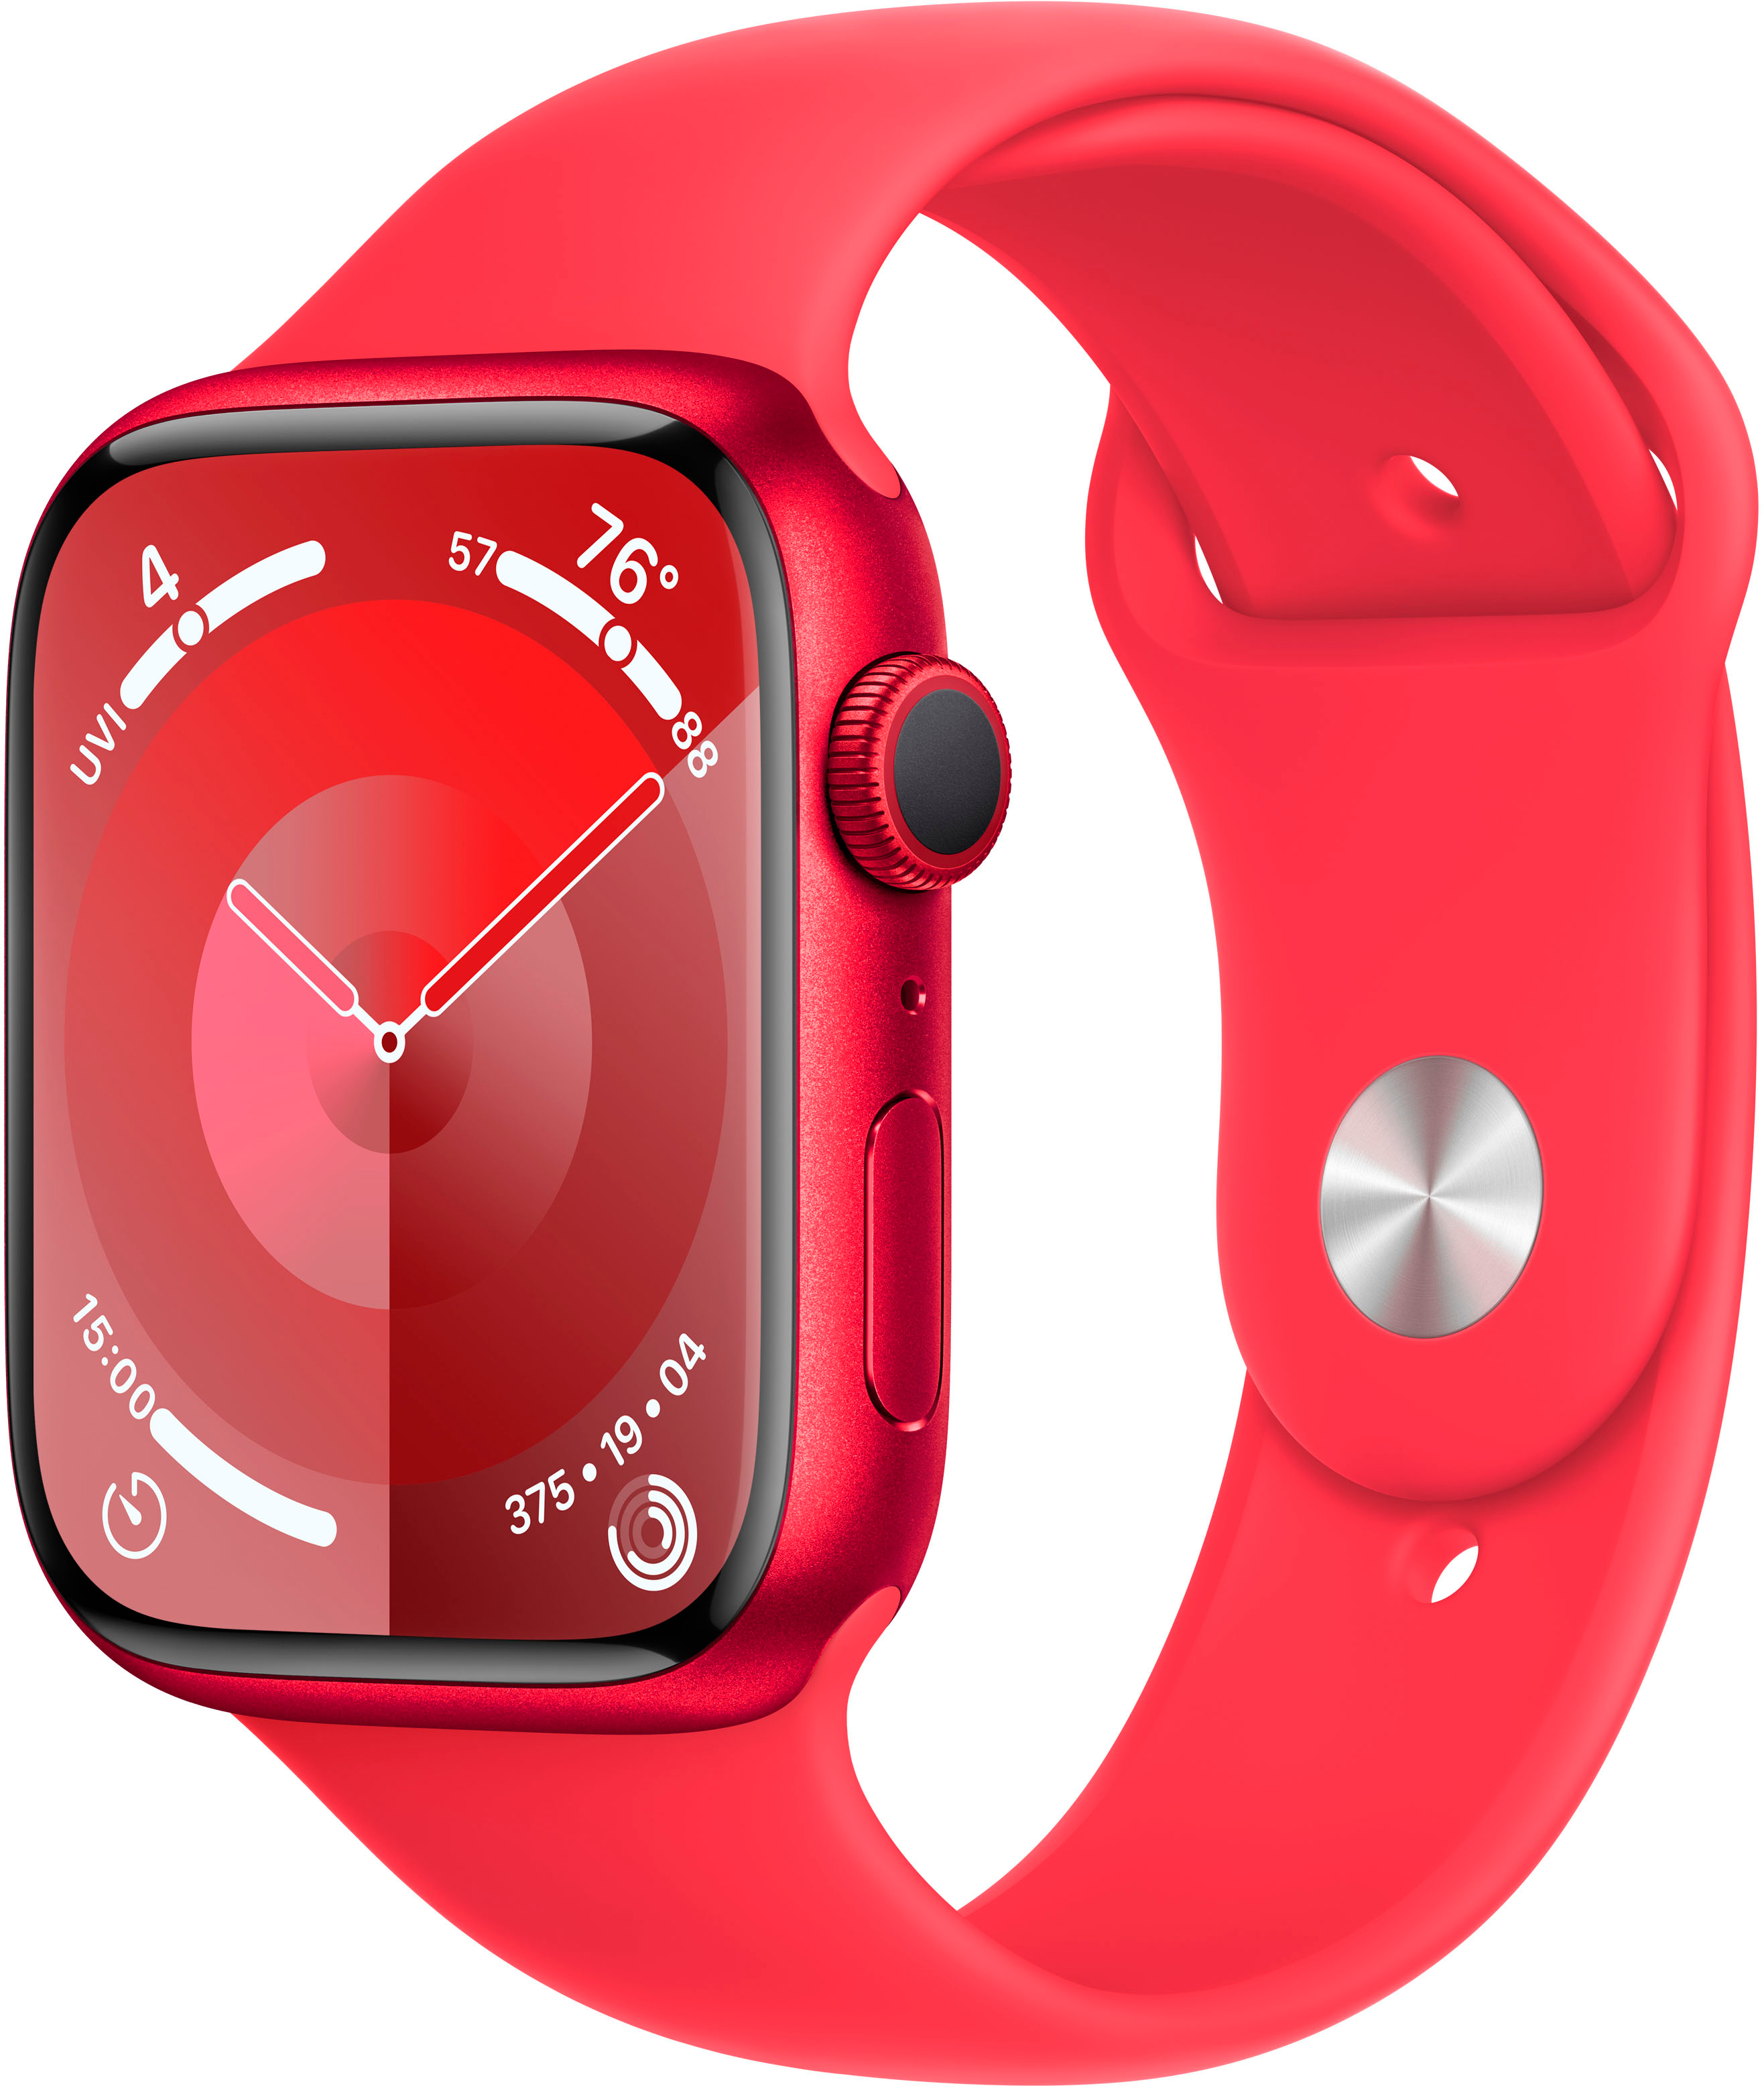 Apple Watch Series 9 price in India: Apple launches Watch Series 9